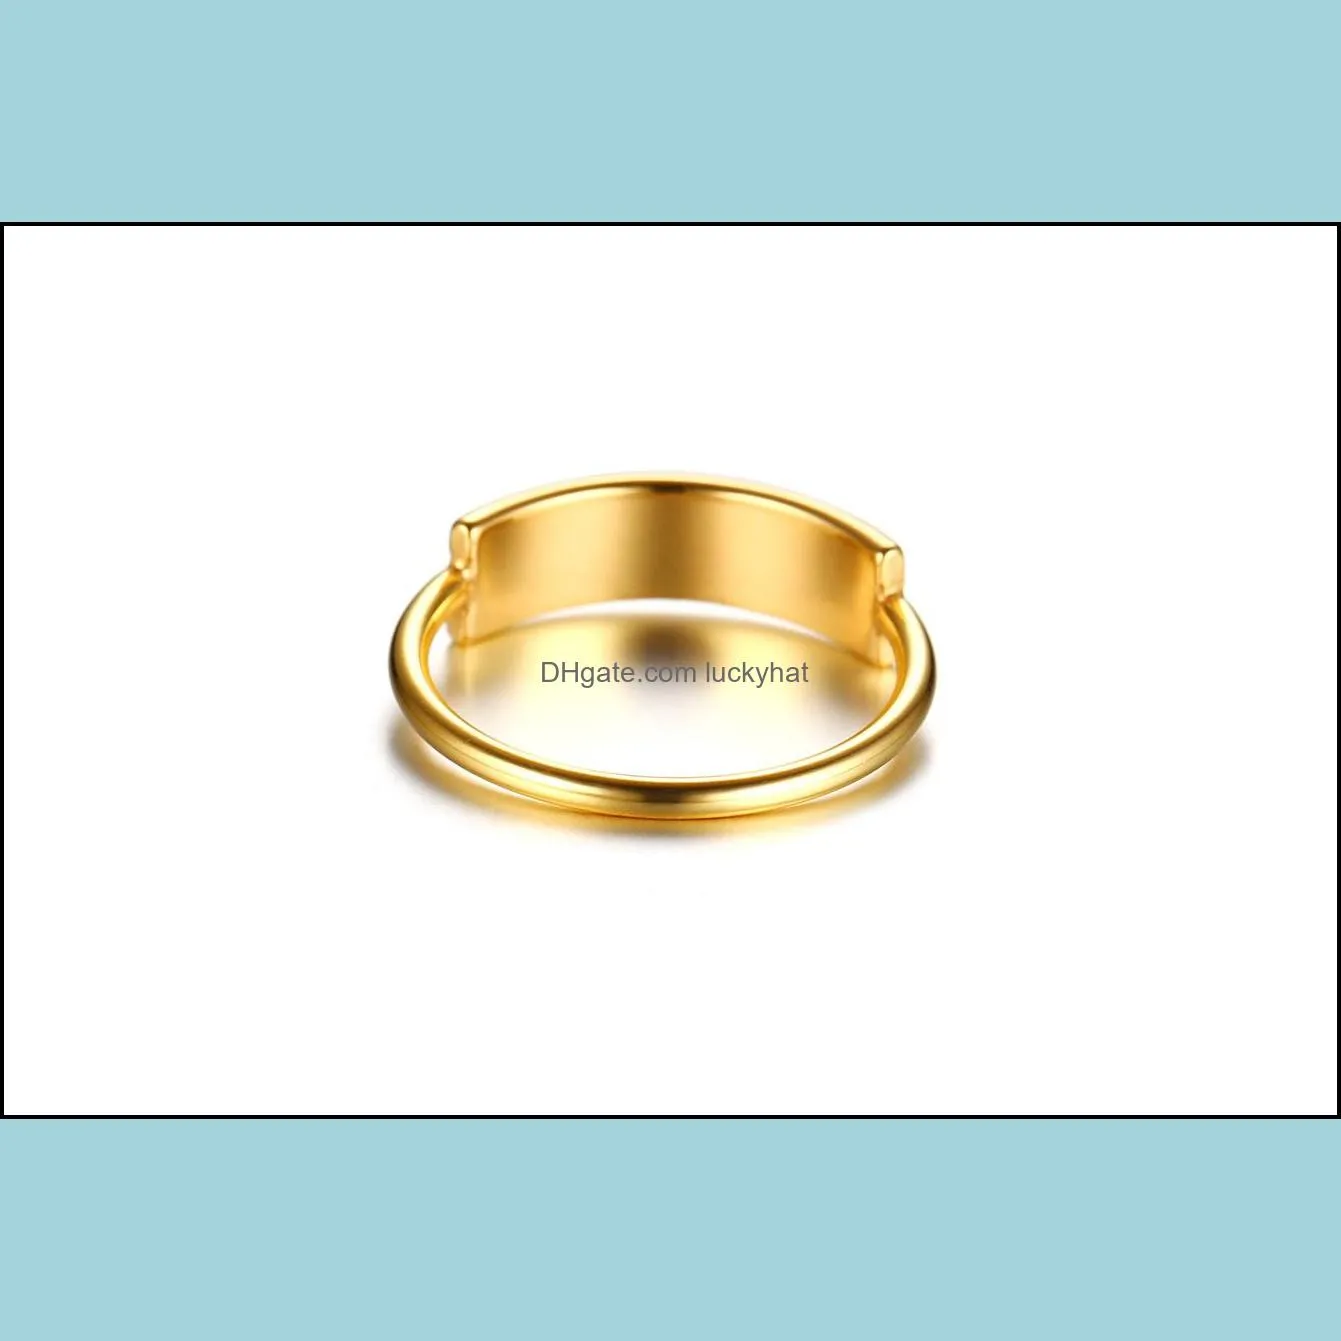 stainless steel bar name rings fashion jewelry can engraved letters rings by buyer wedding jewelry gifts gold women ring